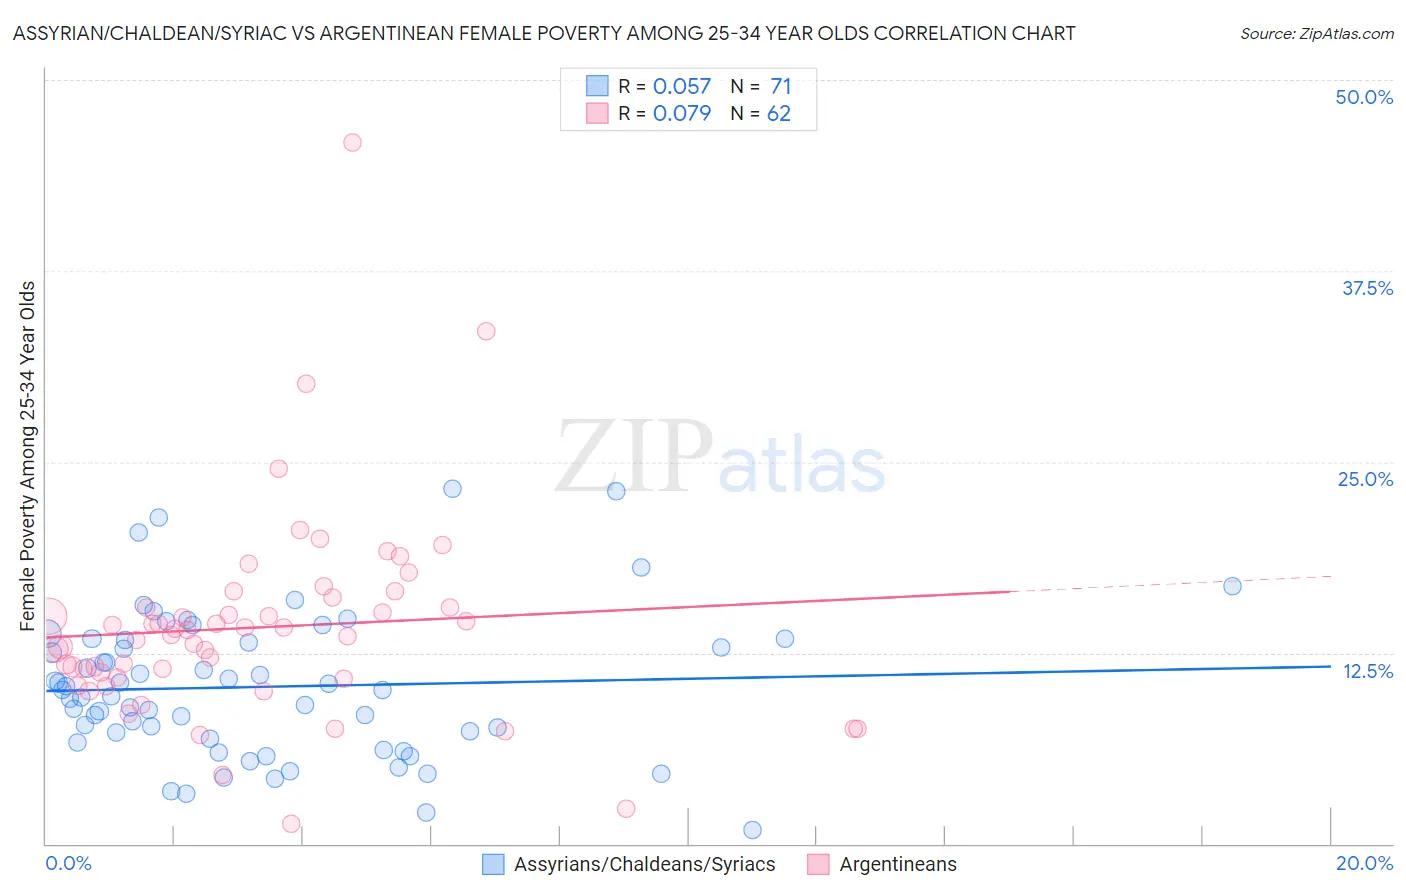 Assyrian/Chaldean/Syriac vs Argentinean Female Poverty Among 25-34 Year Olds